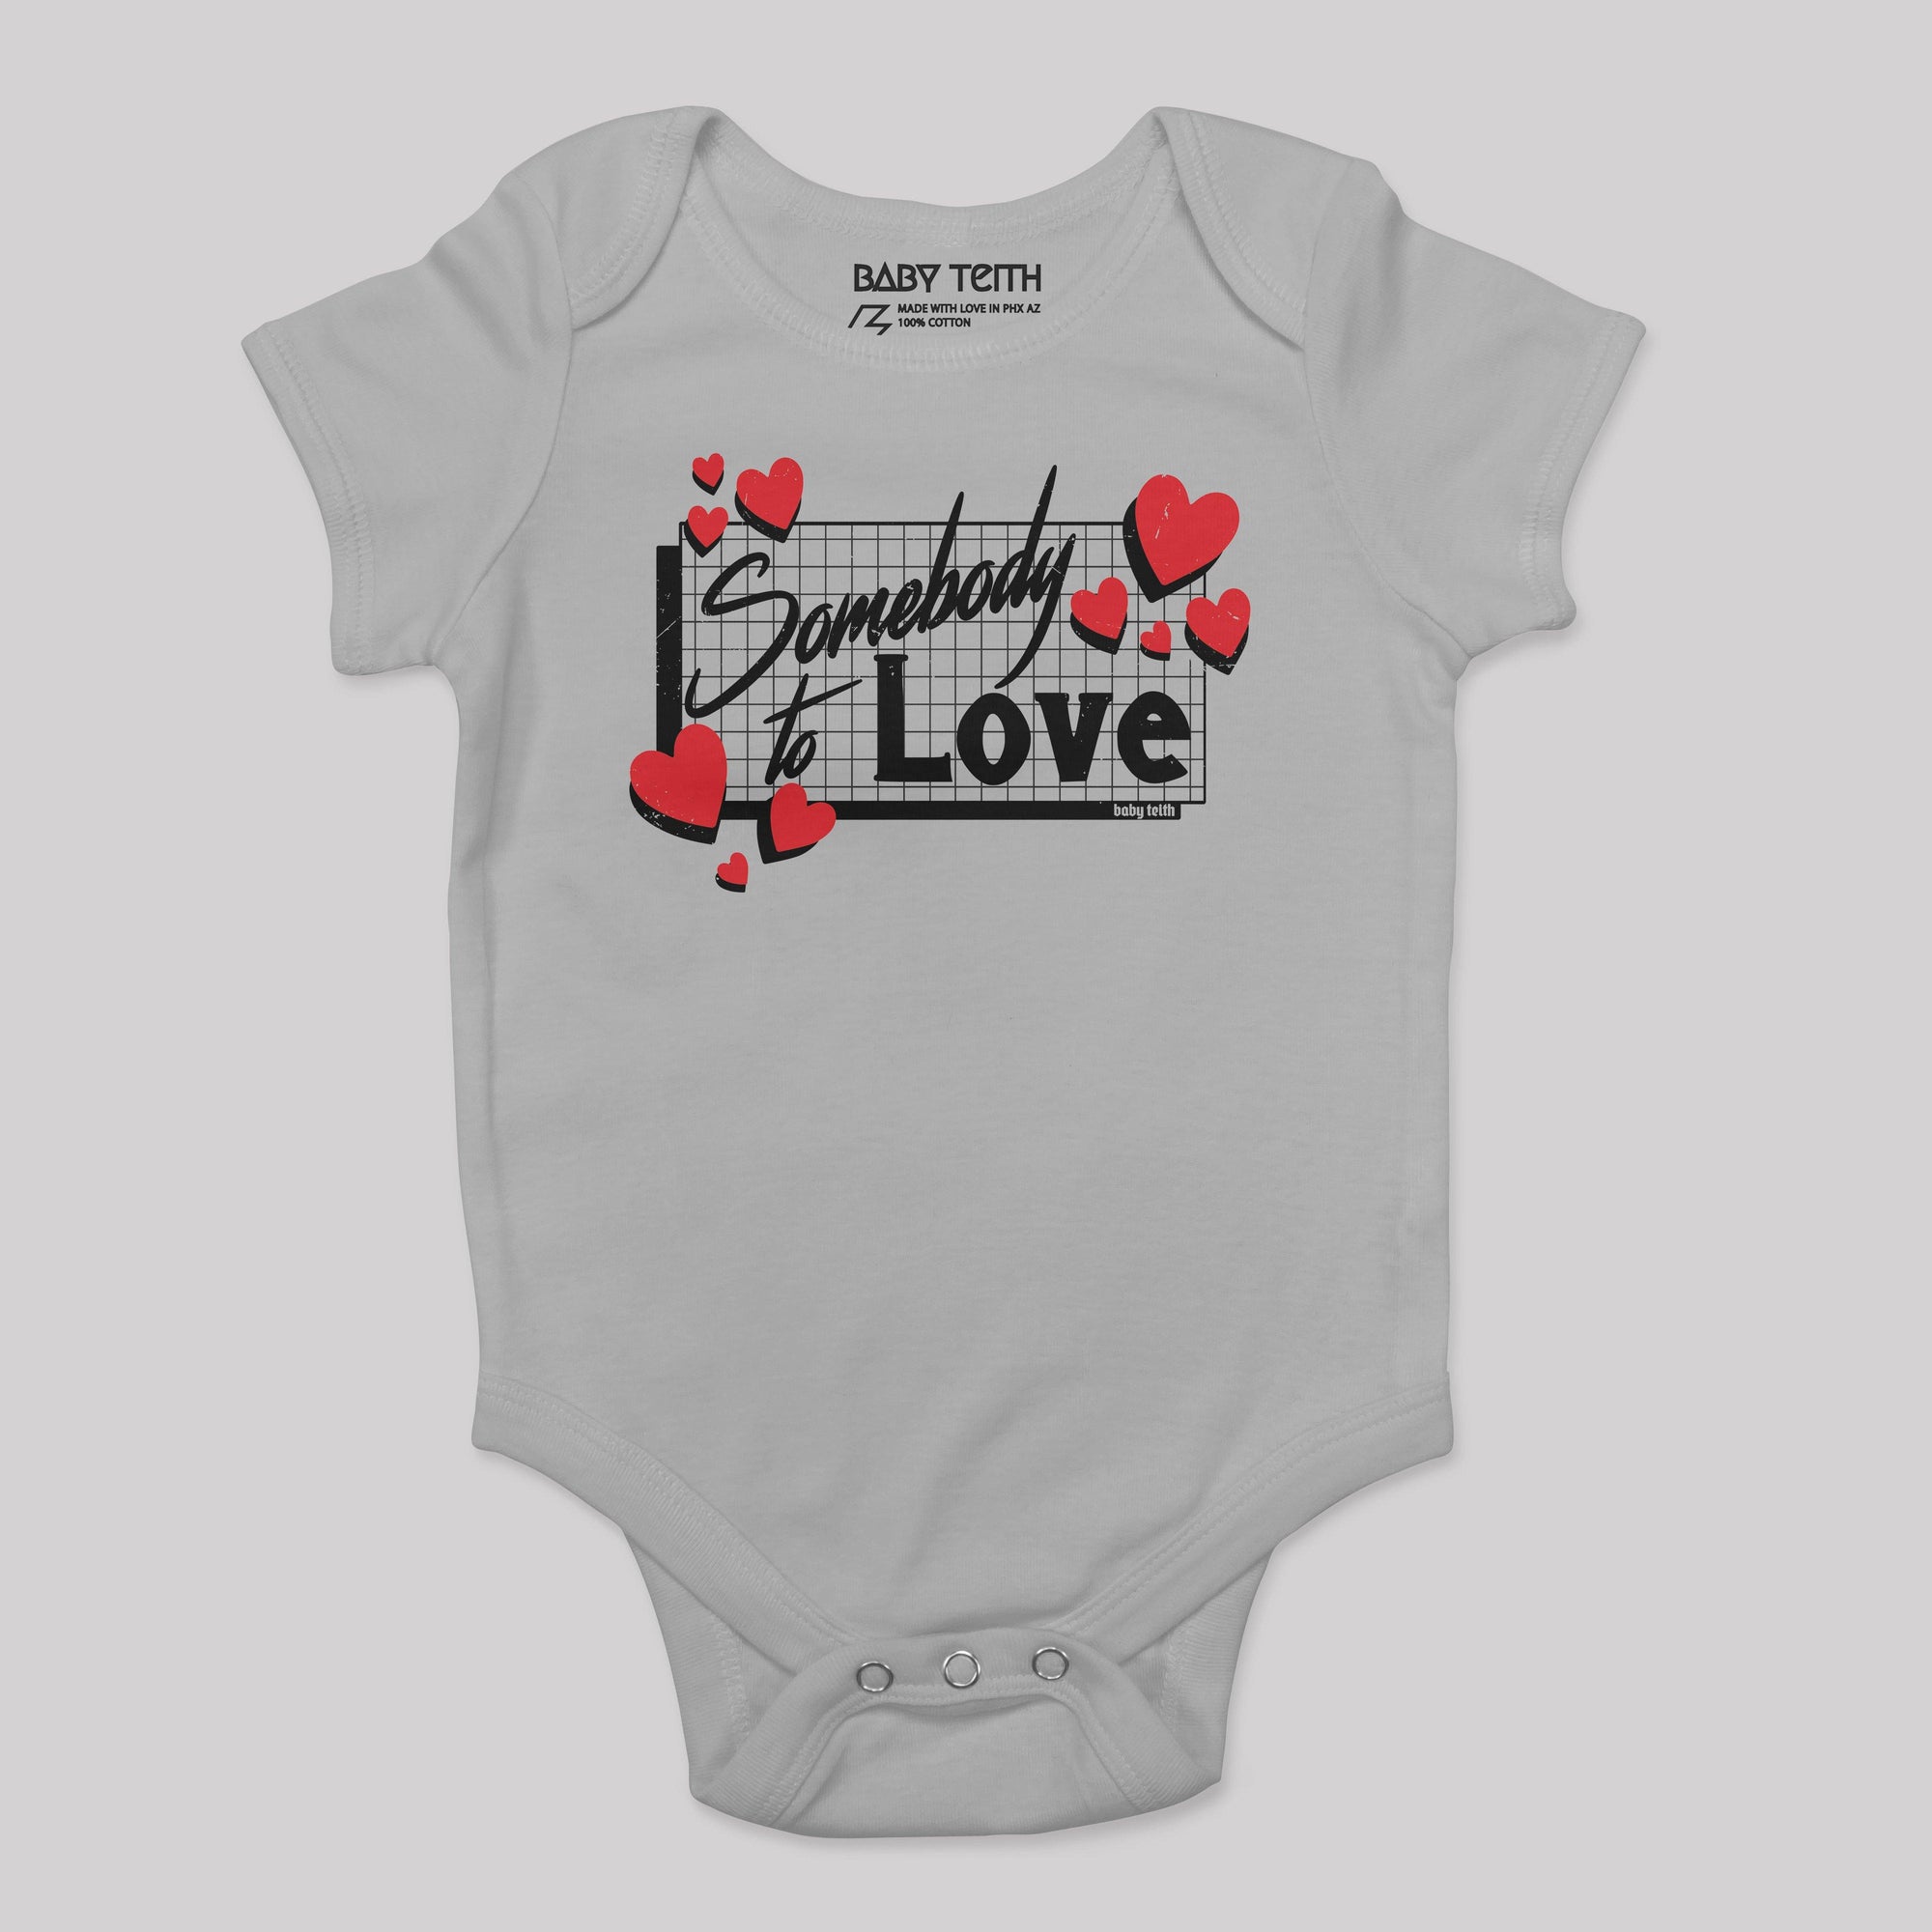 "Somebody to Love" 80's Bodysuit for Babies - Baby Teith